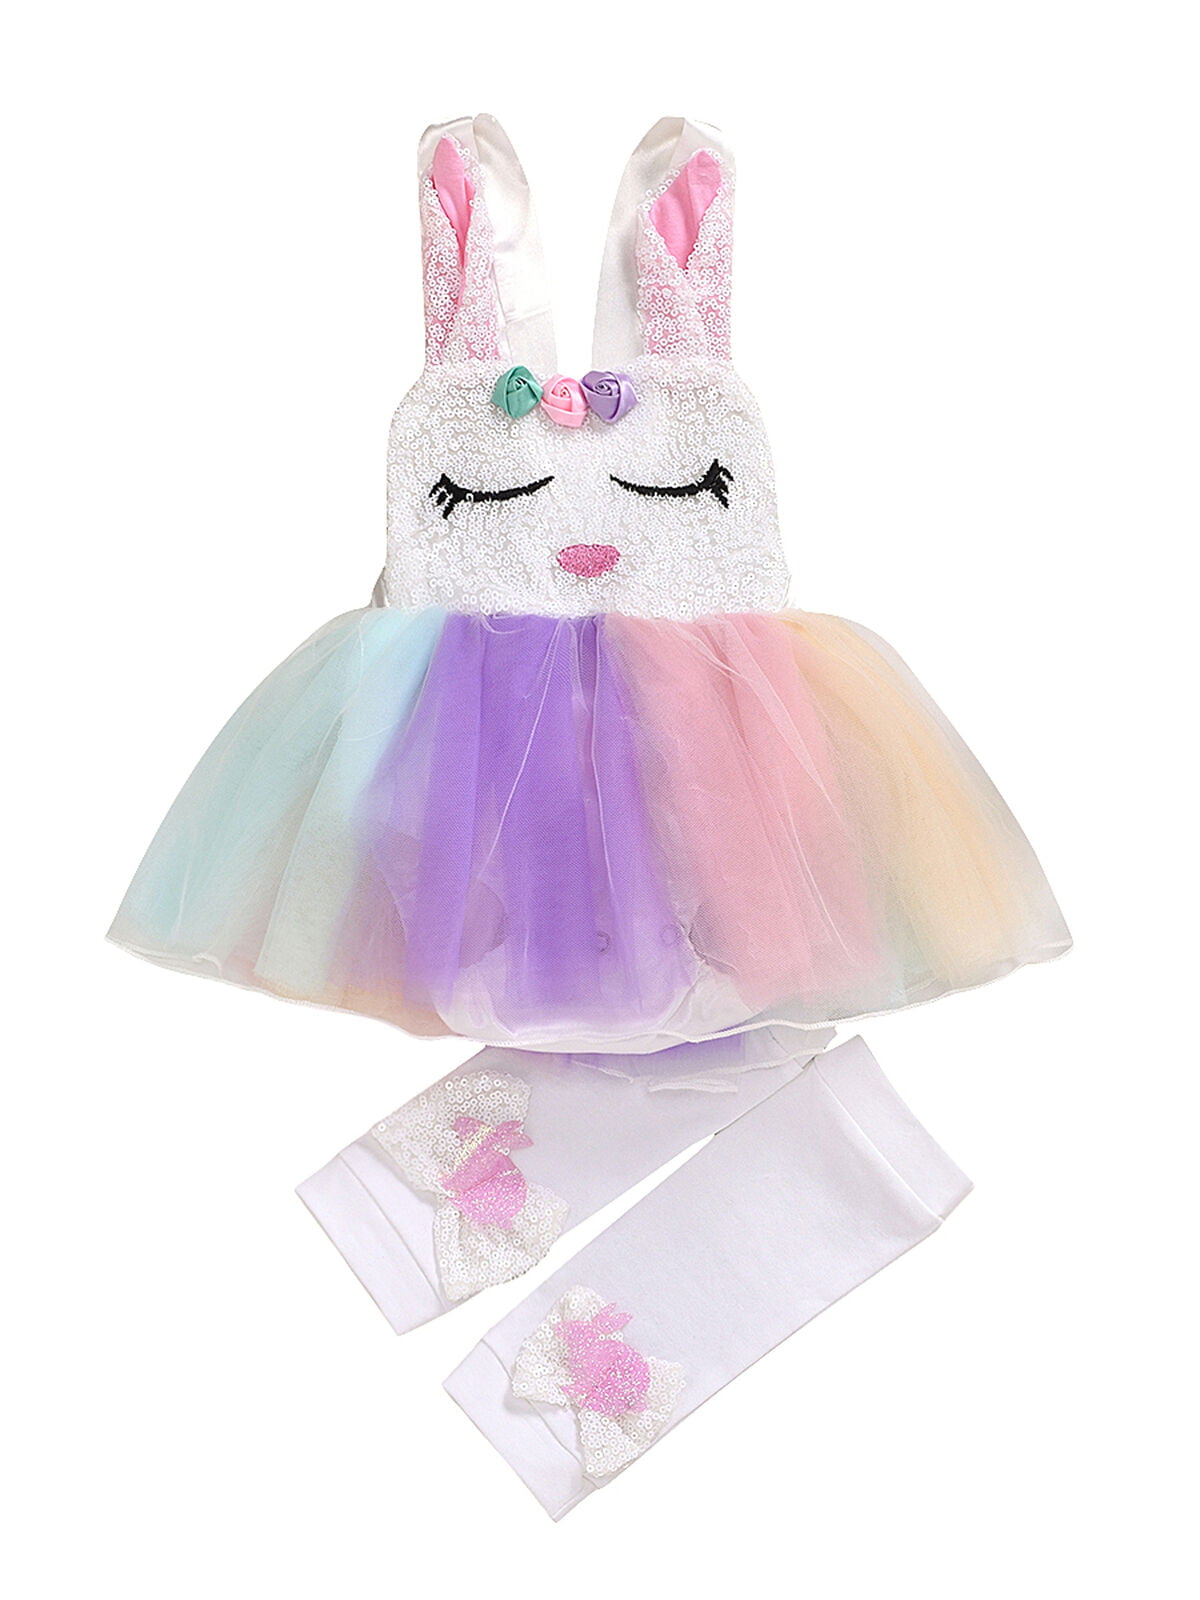 Baby Girl Easter Outfits Toddler Girls Tulle Skirt Short Sleeve Rabbit Romper Tops Lace Tutu Skirt Outfit